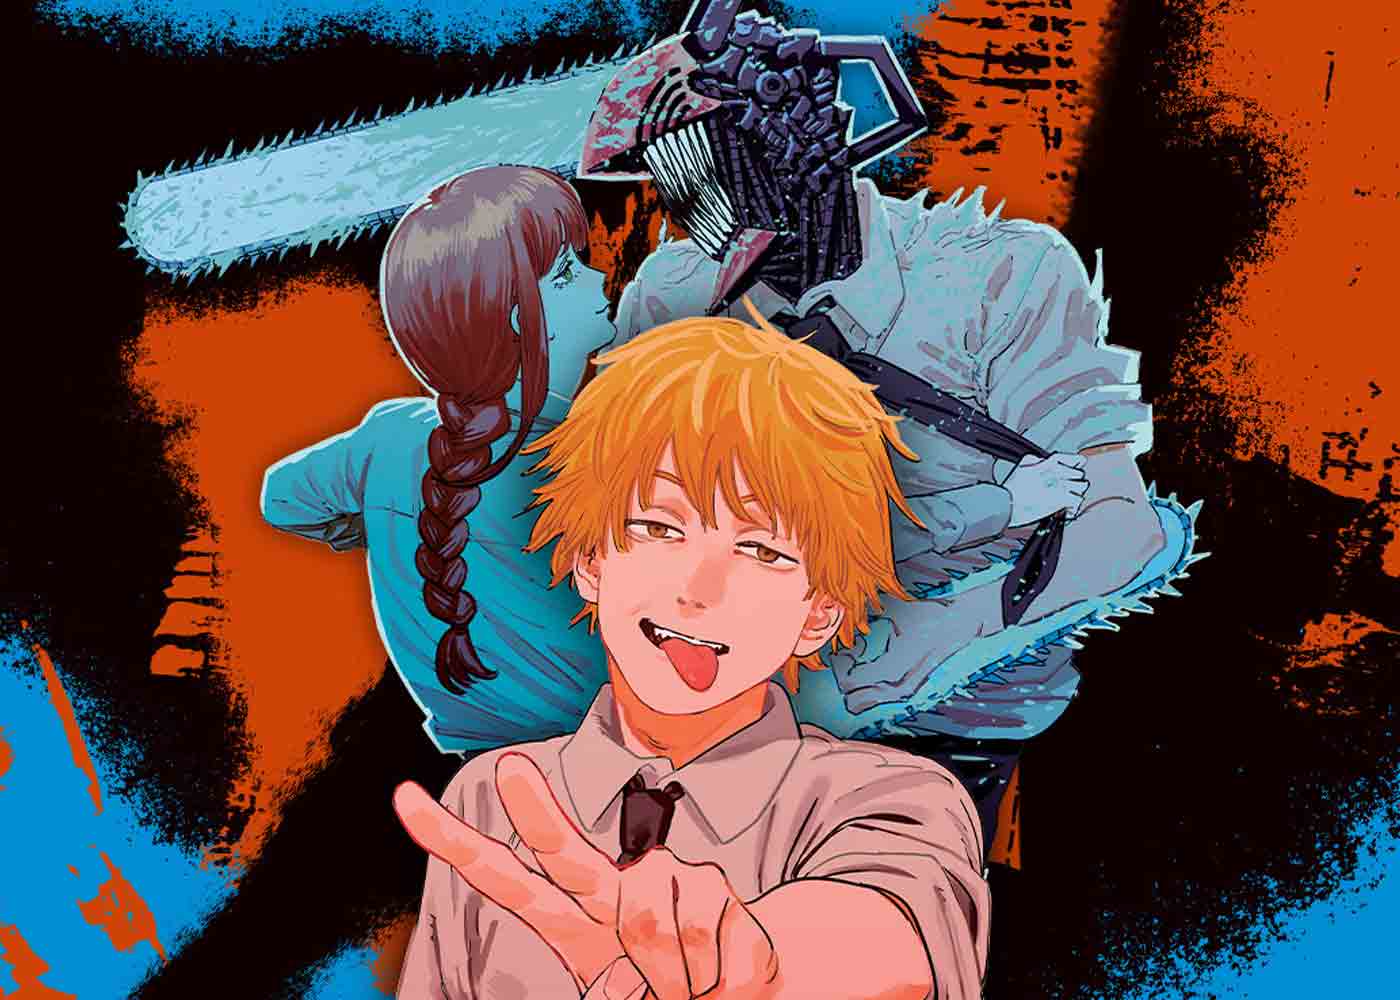 Chainsaw Man Anime Adaptation Coming to Crunchyroll Later This Year - IGN